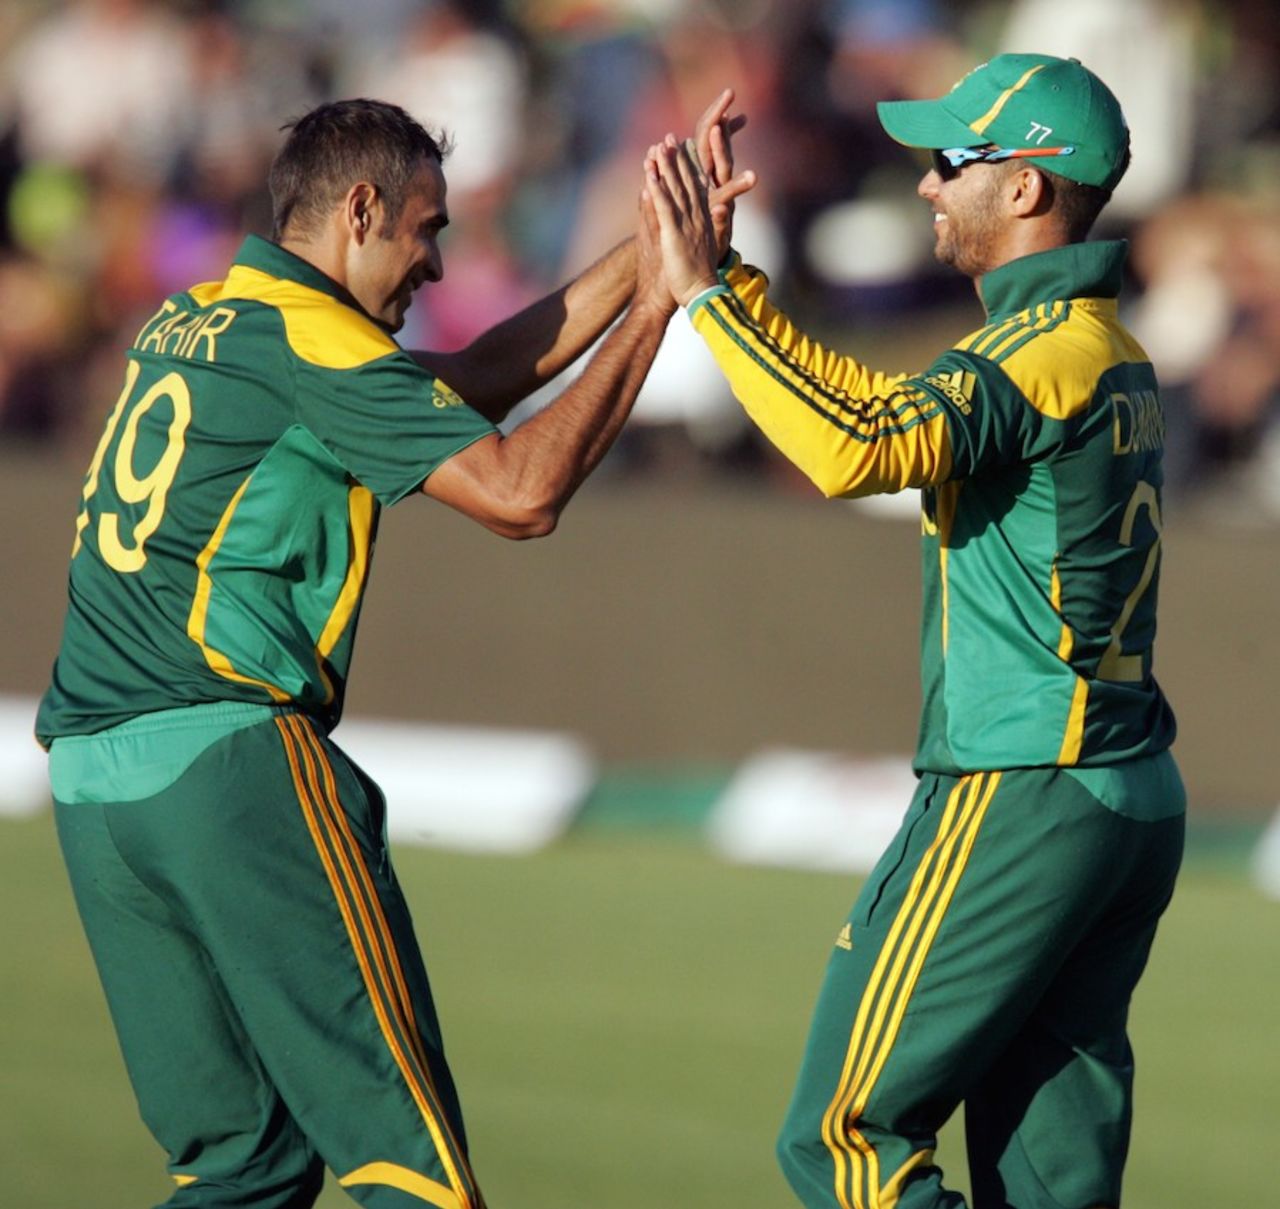 Imran Tahir is congratulated by JP Duminy after a wicket, Zimbabwe v South Africa, 1st ODI, Bulawayo, August 17, 2014